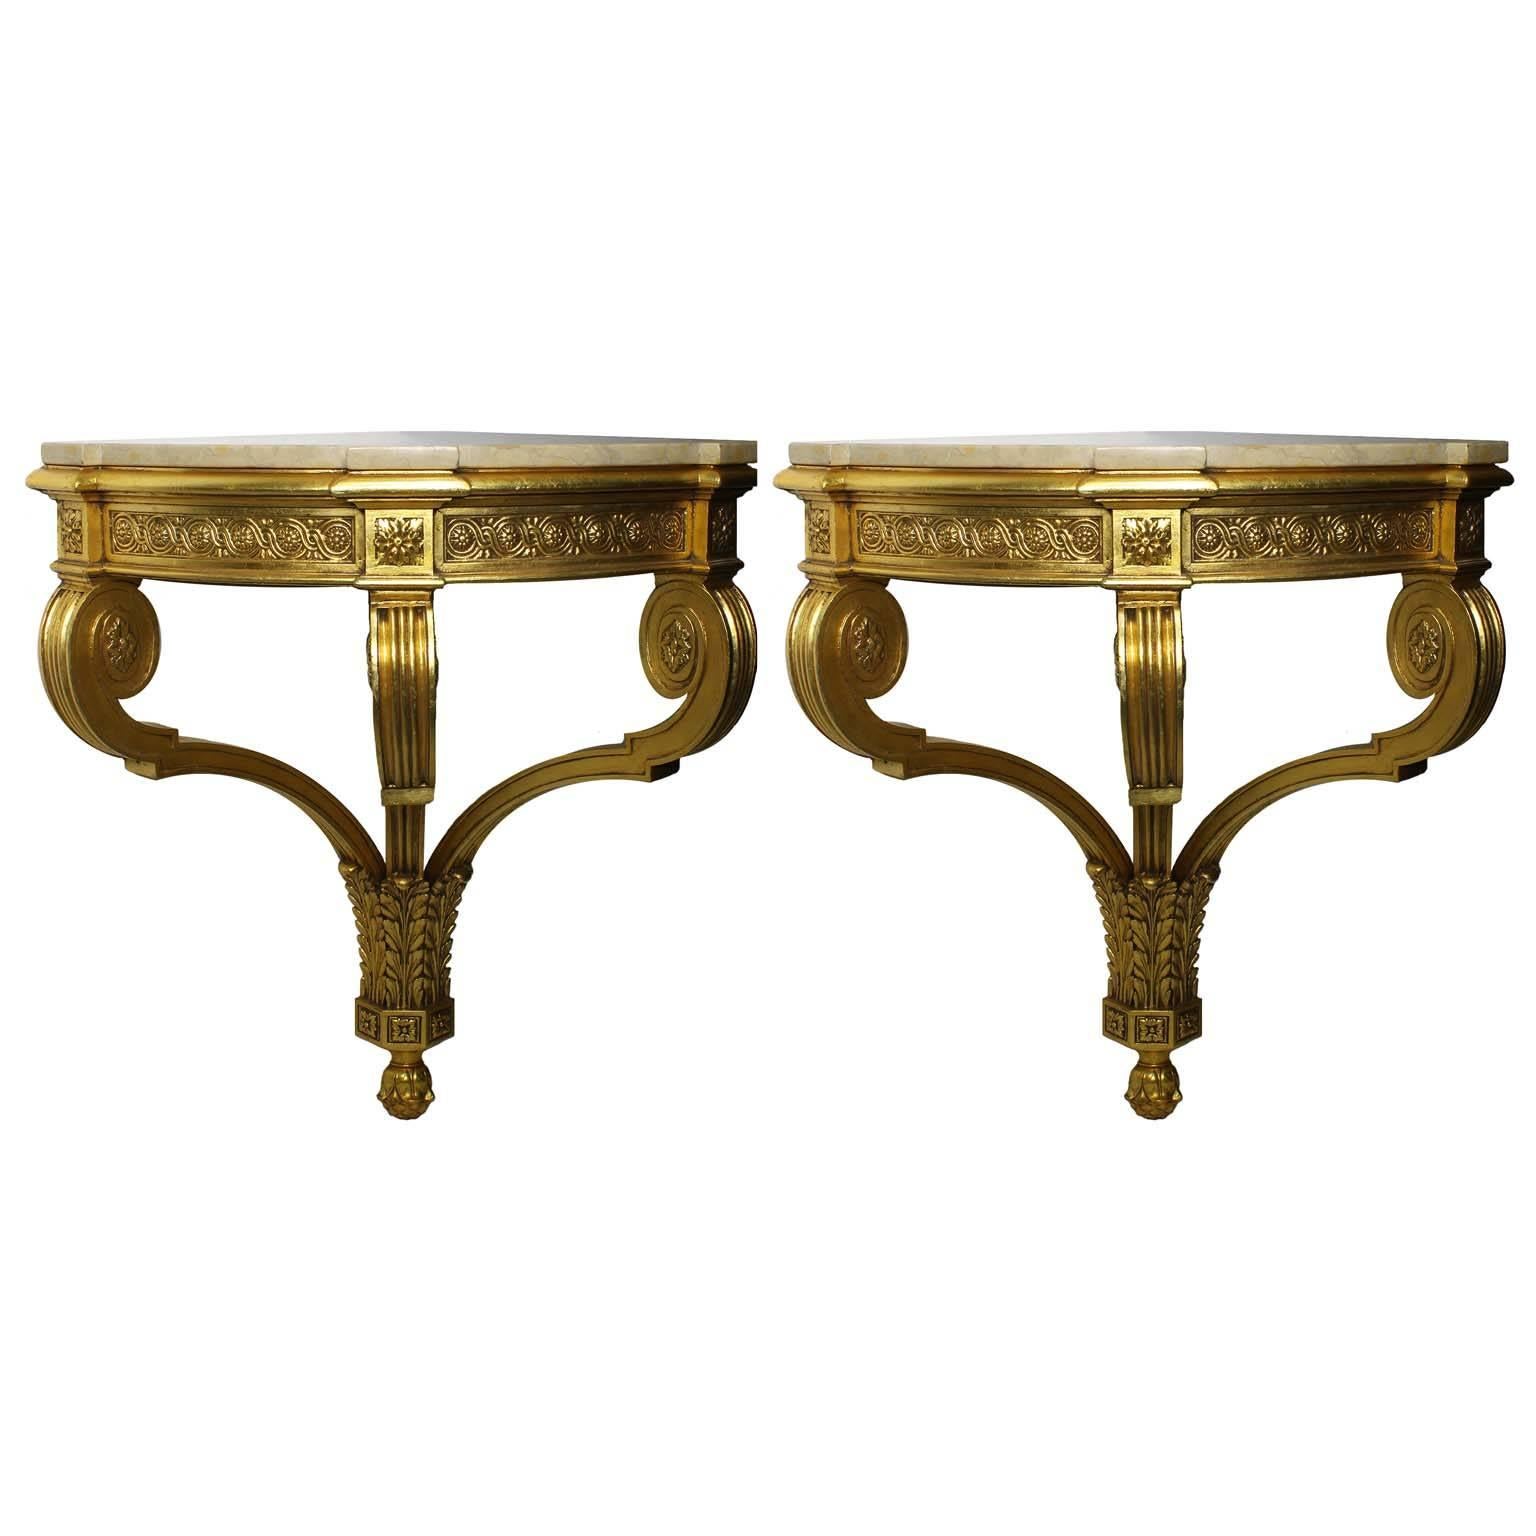 Pair of Belle Epoque 19th-20th Century Louis XV Style Giltwood Corner Consoles For Sale